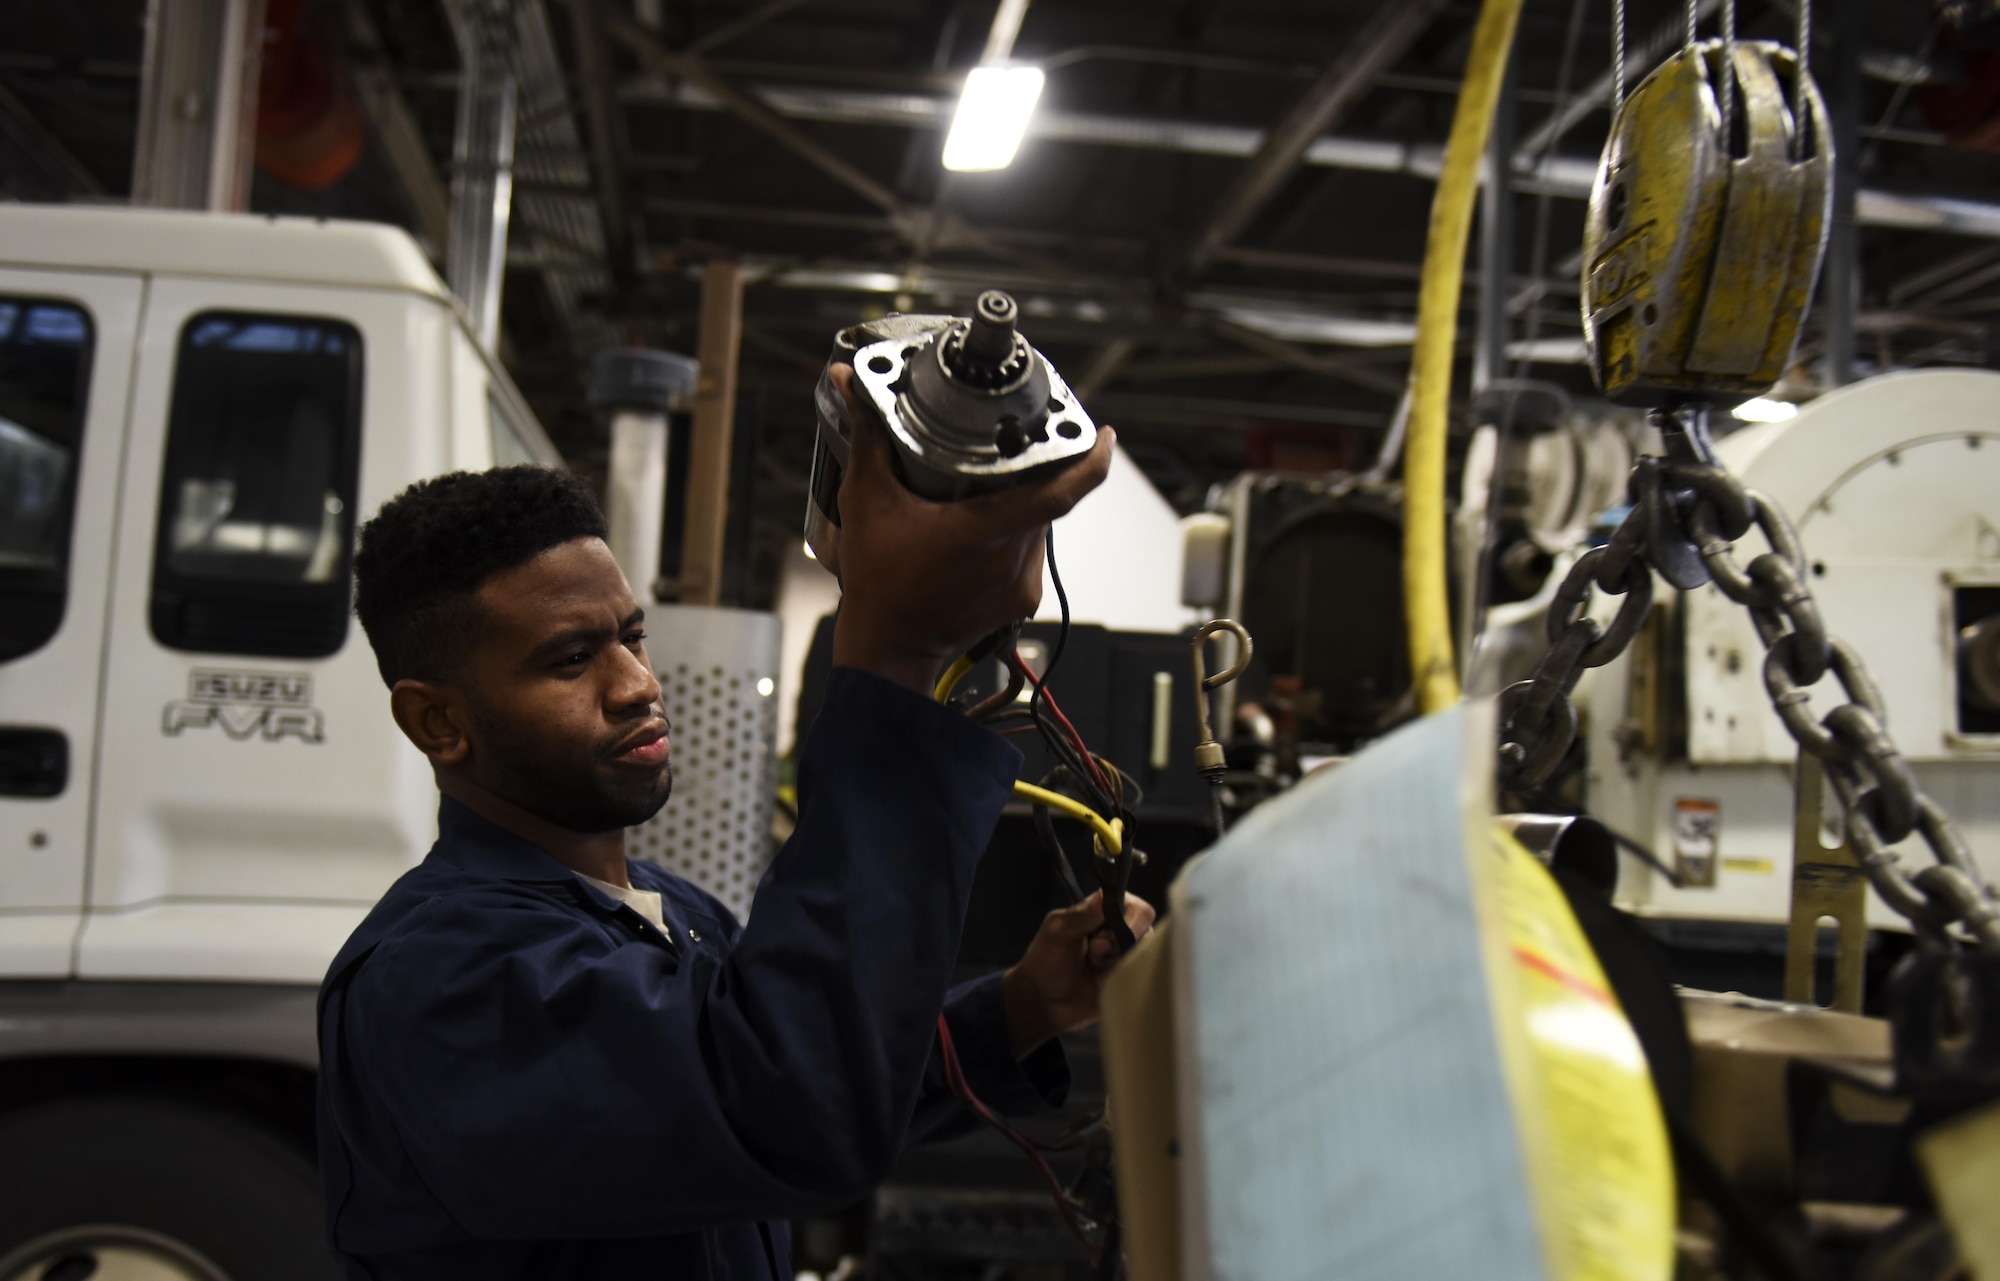 Senior Airman Brandon Johnson, 92nd Logistics Readiness Squadron materiel handling and equipment journeyman, takes a carburetor off an engine Oct. 13, 2016, at Fairchild Air Force Base. His leadership selected him as one of Fairchild’s Finest, a weekly recognition program that highlights top-performing Airmen.
(U.S. Air Force photo/Airman 1st Class Sean Campbell)
